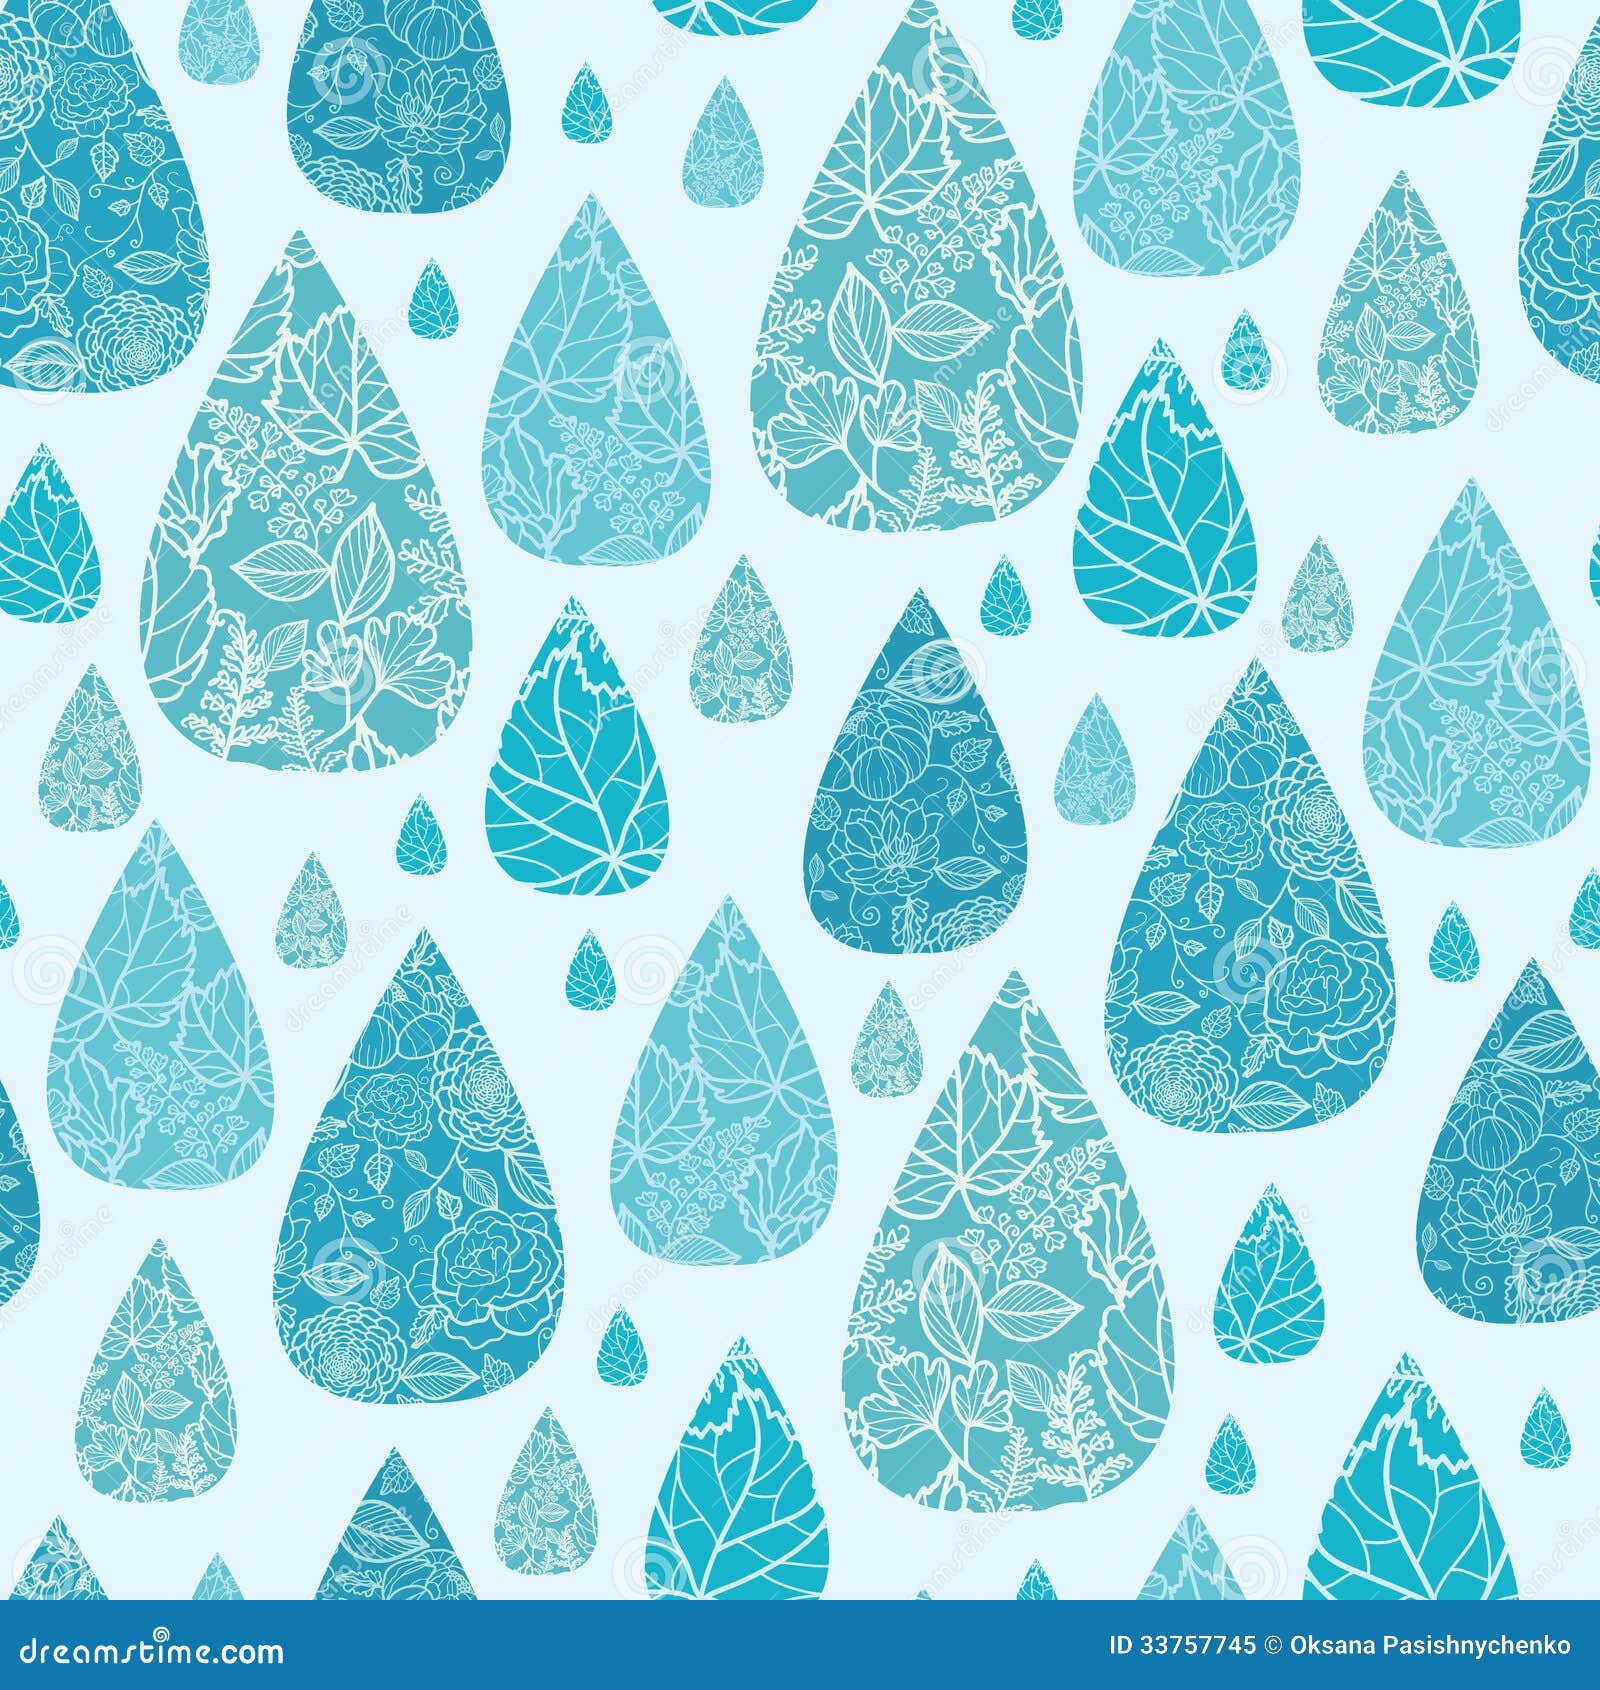 Rain Drops Textured Seamless Pattern Background Royalty Free Stock ...